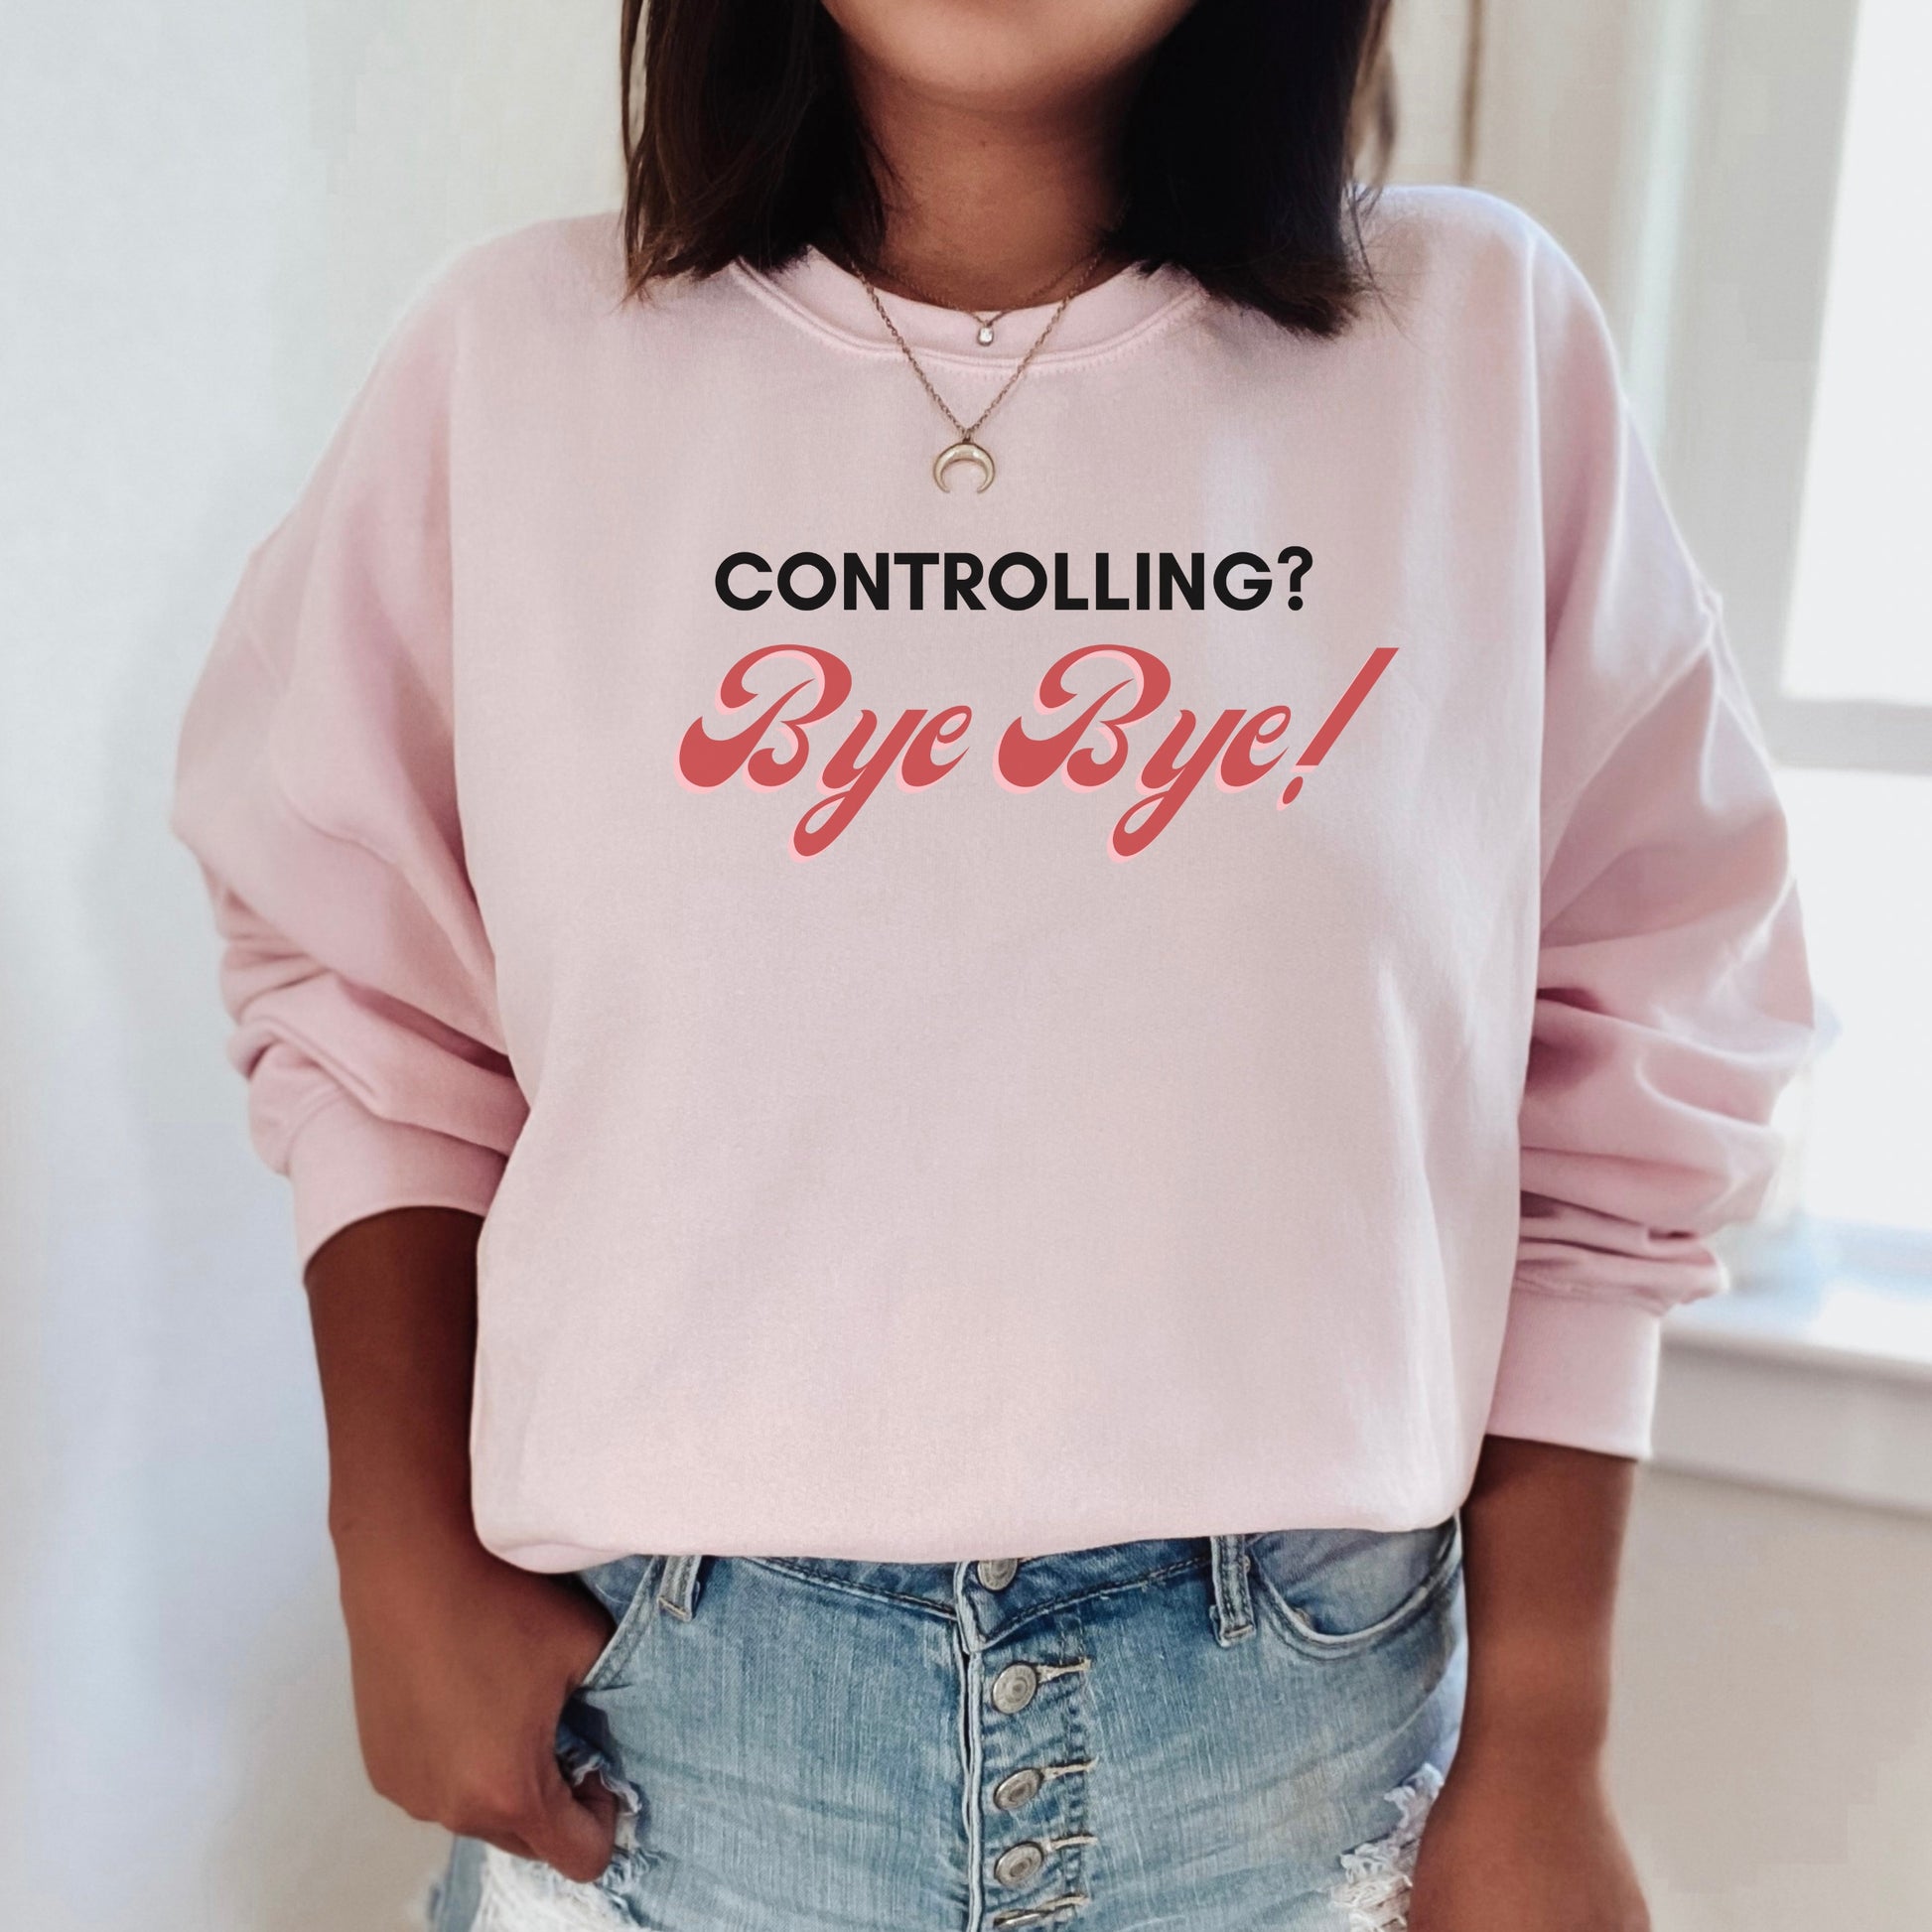 The front of the sweatshirt proudly displays the phrase "Controlling? Bye Bye!" in a bold and eye-catching font. This message serves as a reminder that love is not controlling. Tailored for domestic violence and teen dating violence advocates.